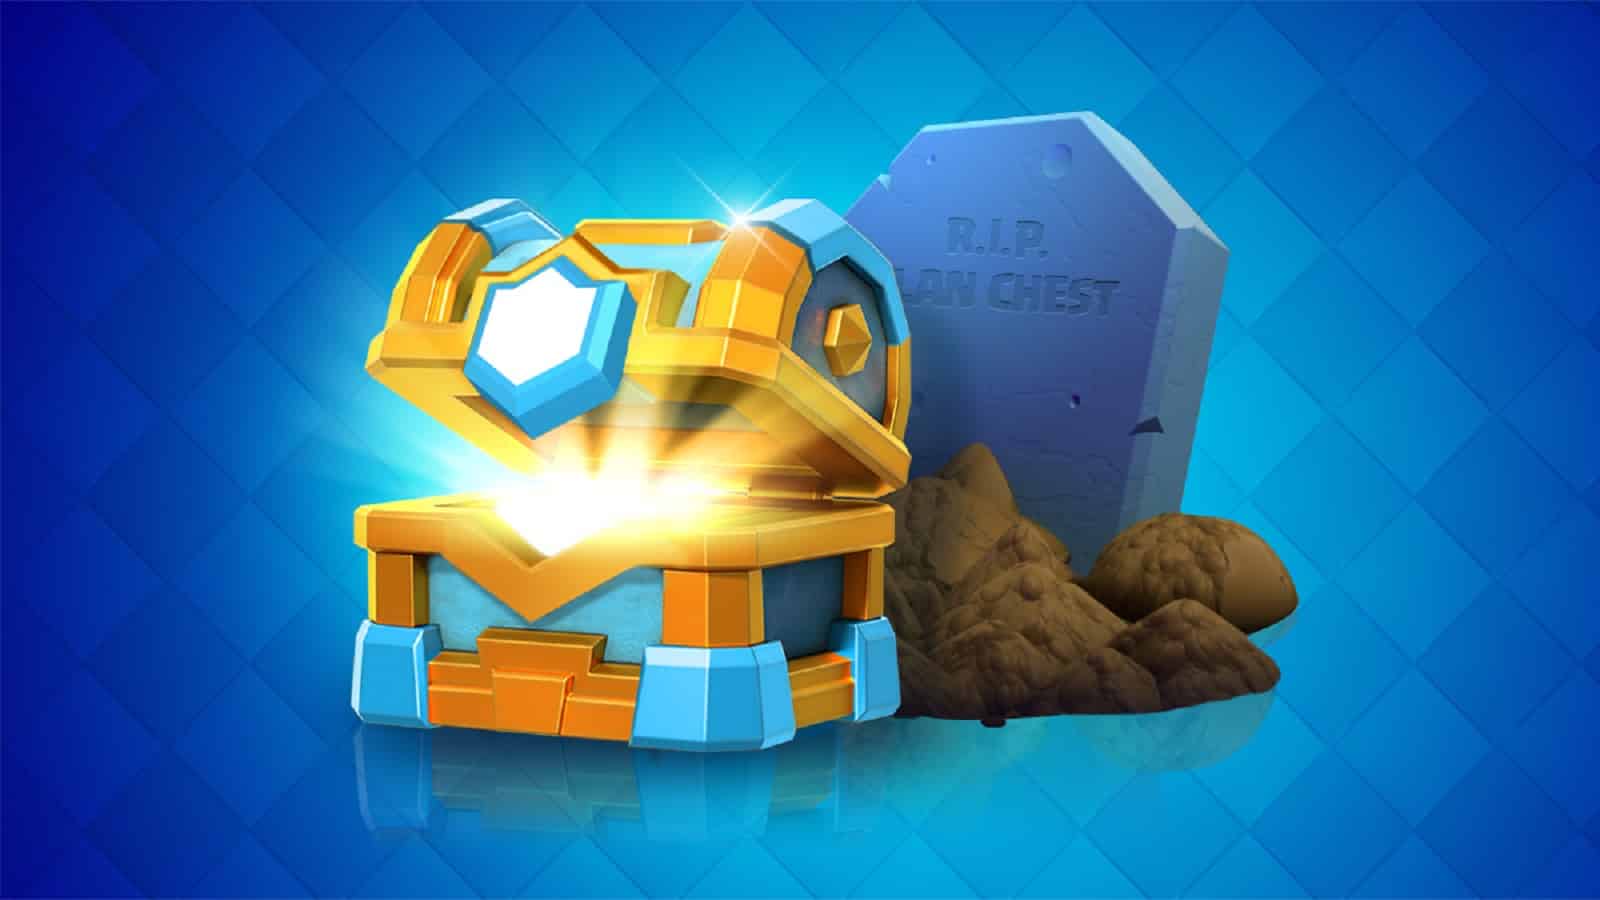 art for the clan chest being discounted from Clash Royale